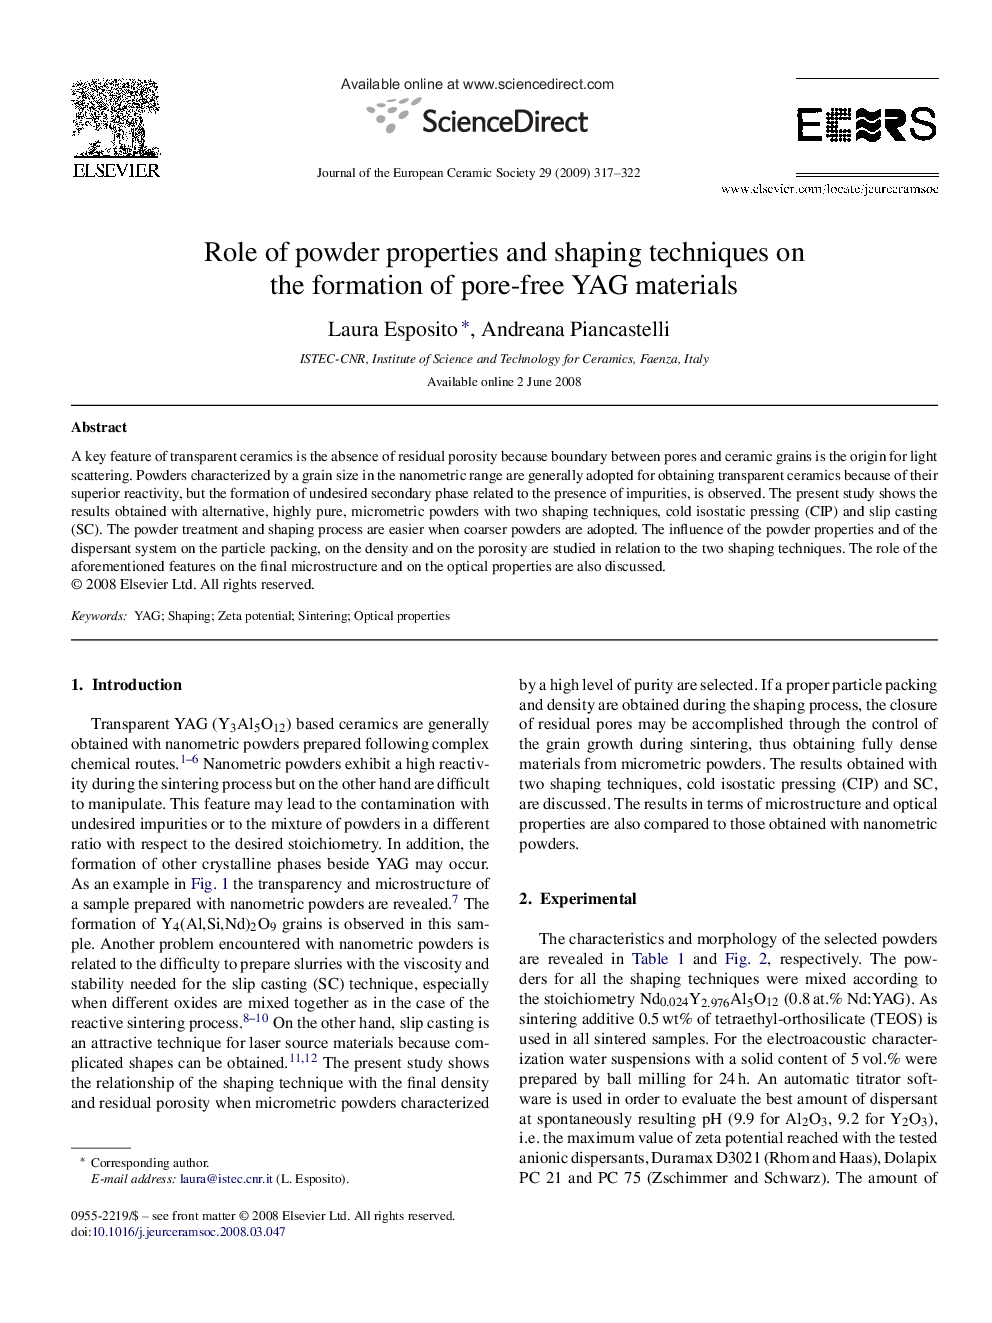 Role of powder properties and shaping techniques on the formation of pore-free YAG materials